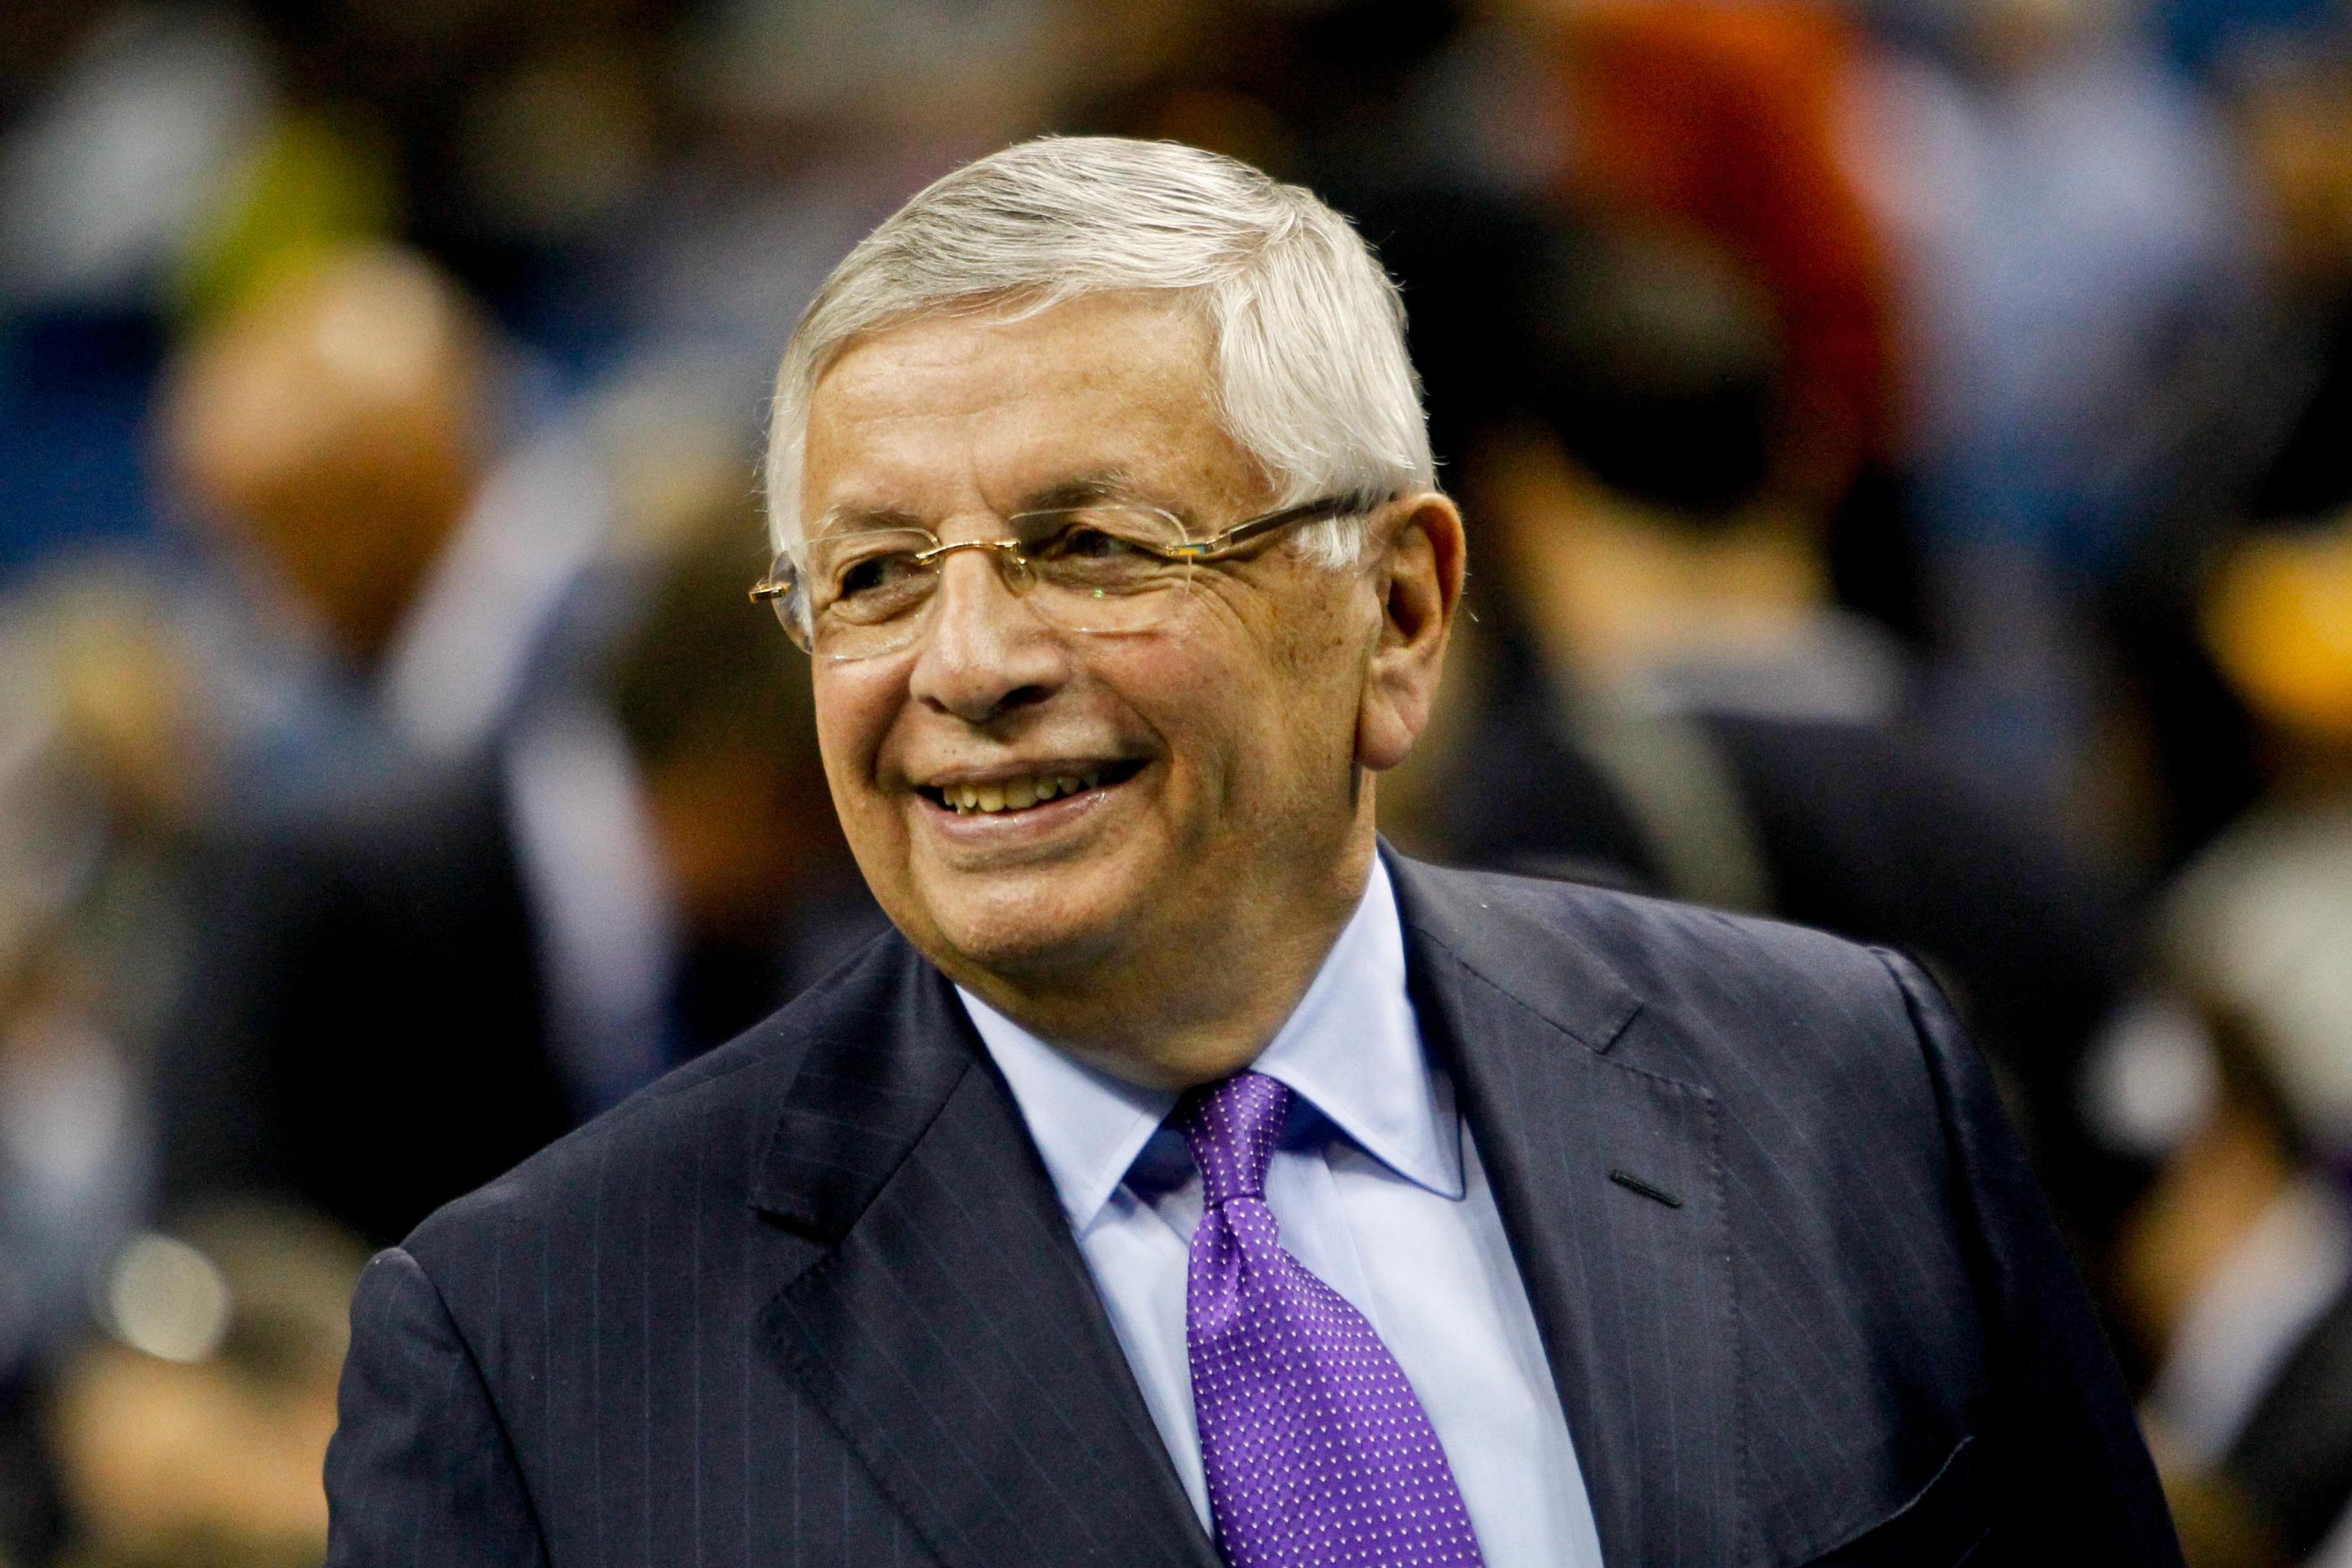 David Stern initially was cool to, but grew to embrace NBA's